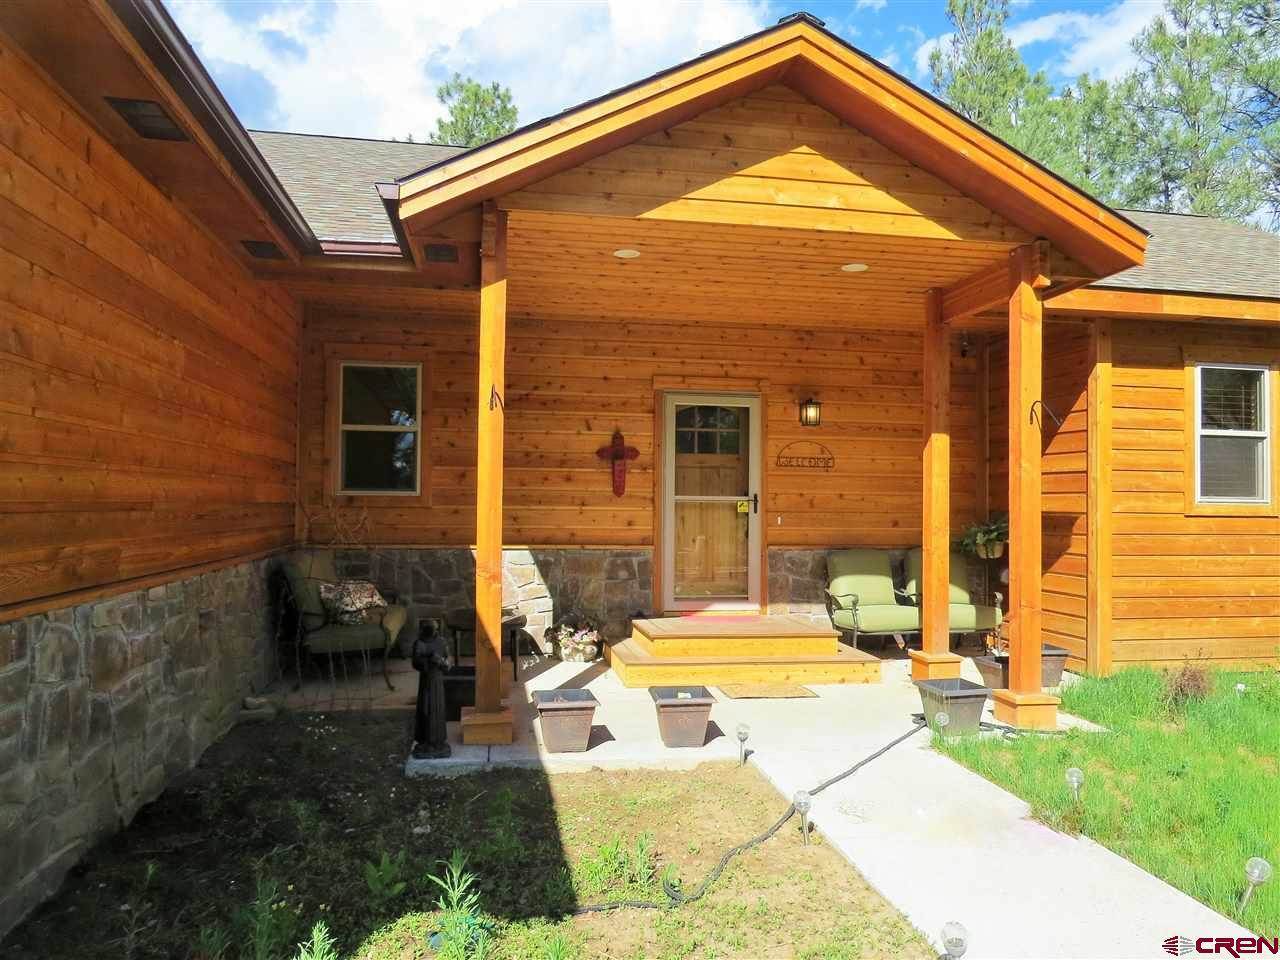 30 Rosewood, Pagosa Springs, CO 81147